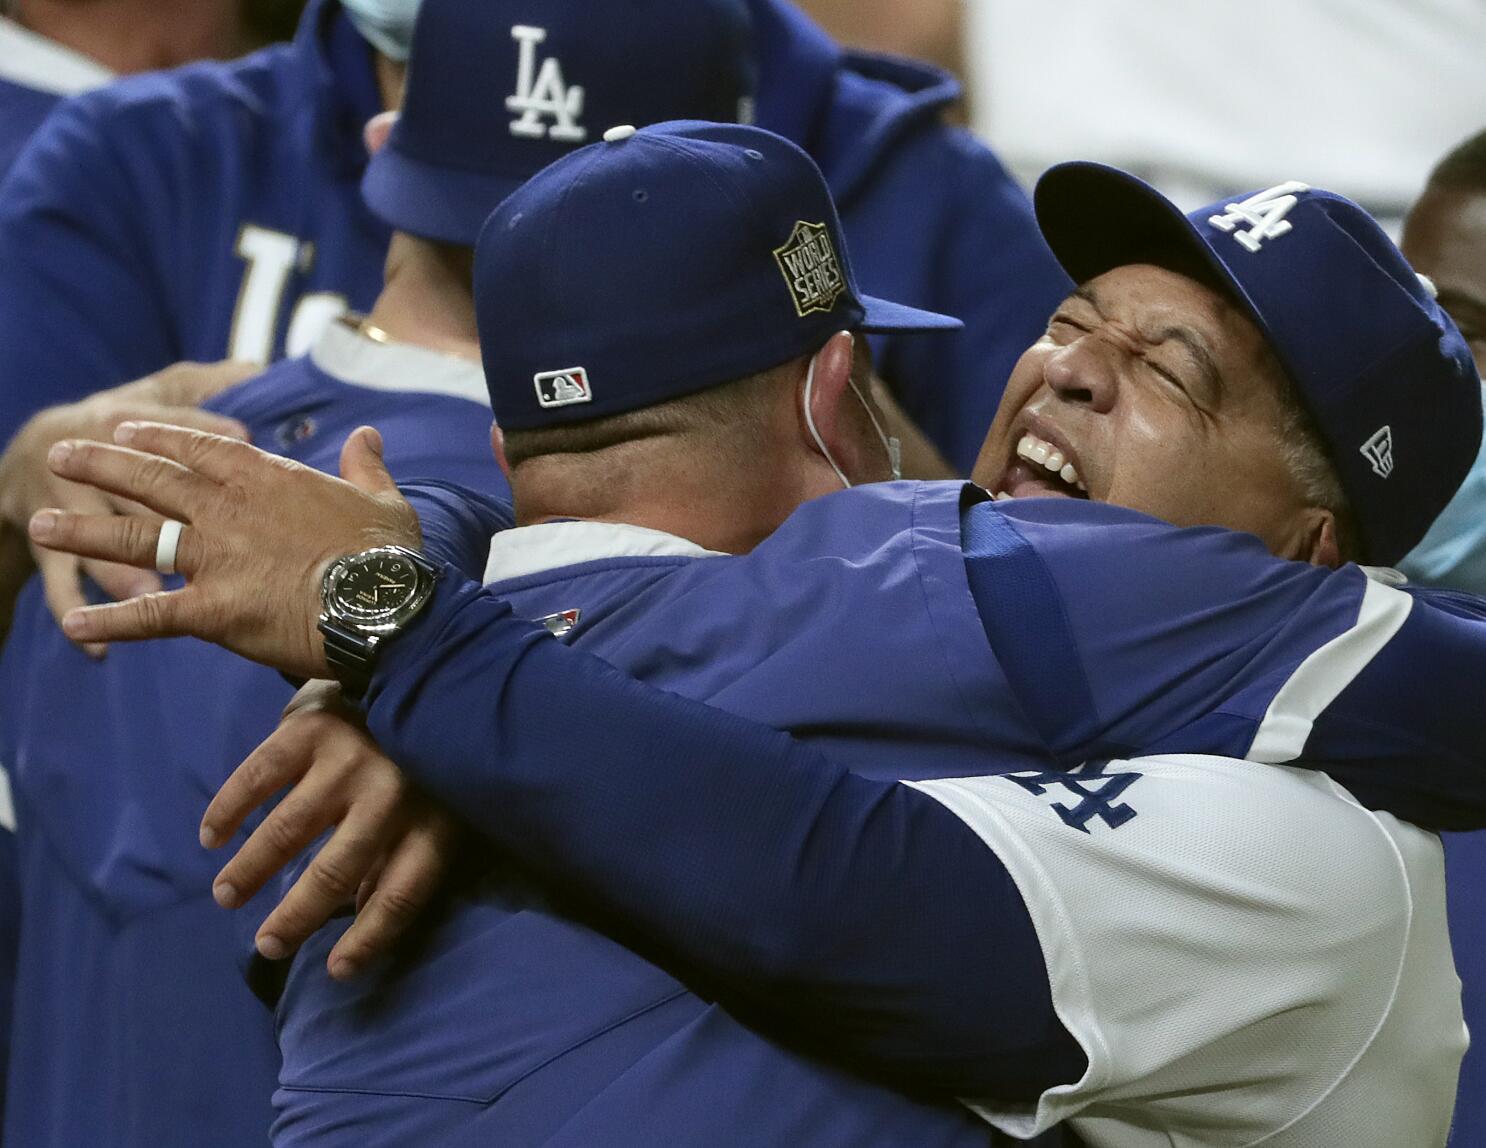 Dave Roberts carries heavy heart into Dodgers season: 'I know how much my  dad meant to me